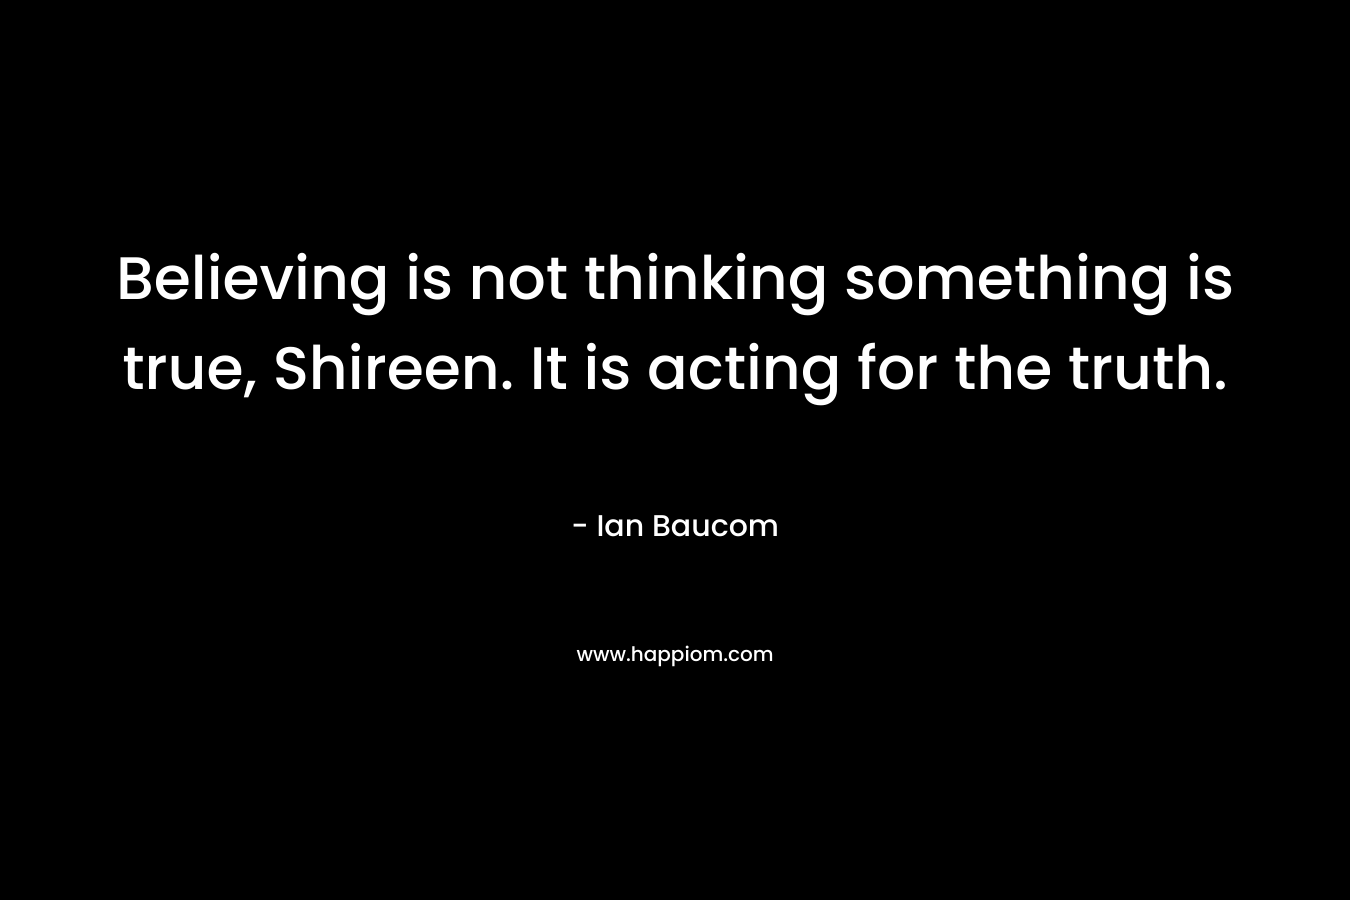 Believing is not thinking something is true, Shireen. It is acting for the truth.